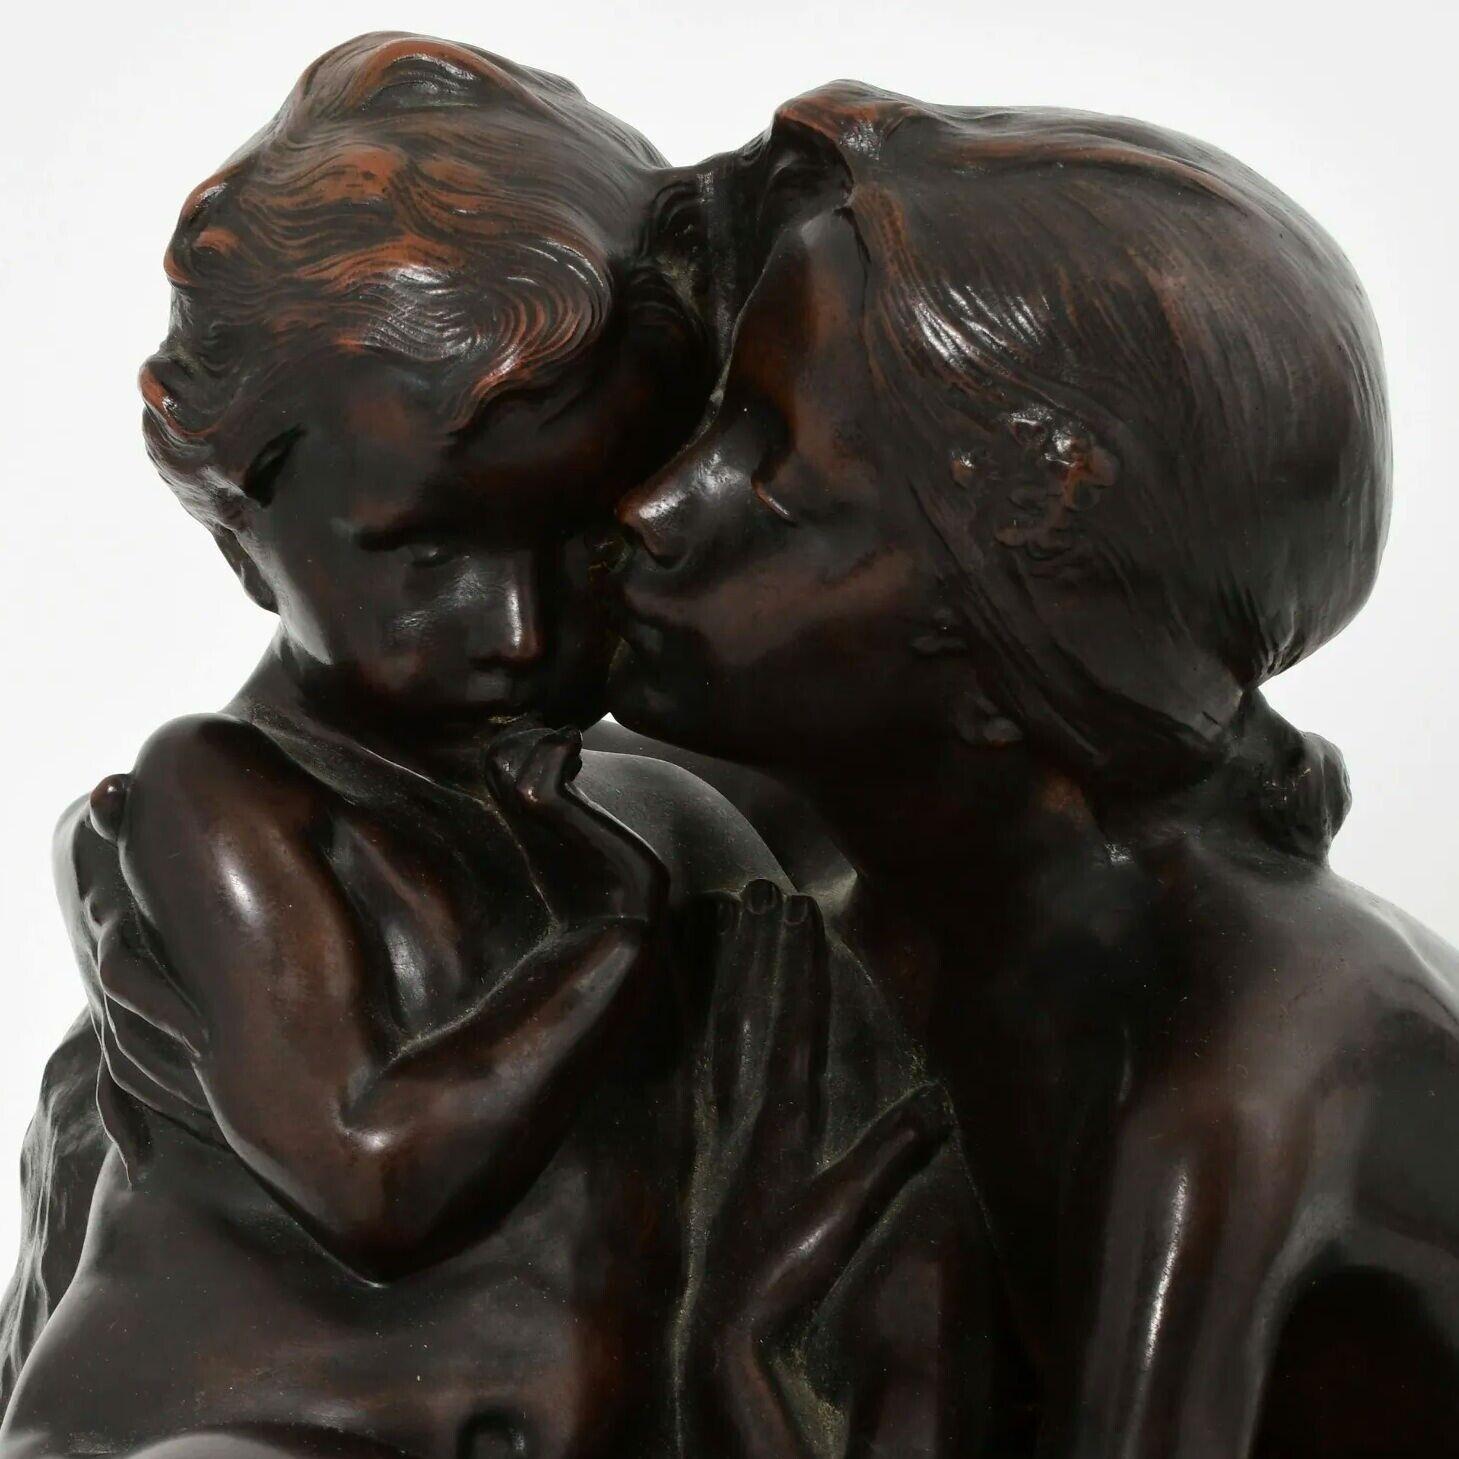 Antique French Bronze Sculpture of Sisters by Henri Pernot (1859-1937) For Sale 2